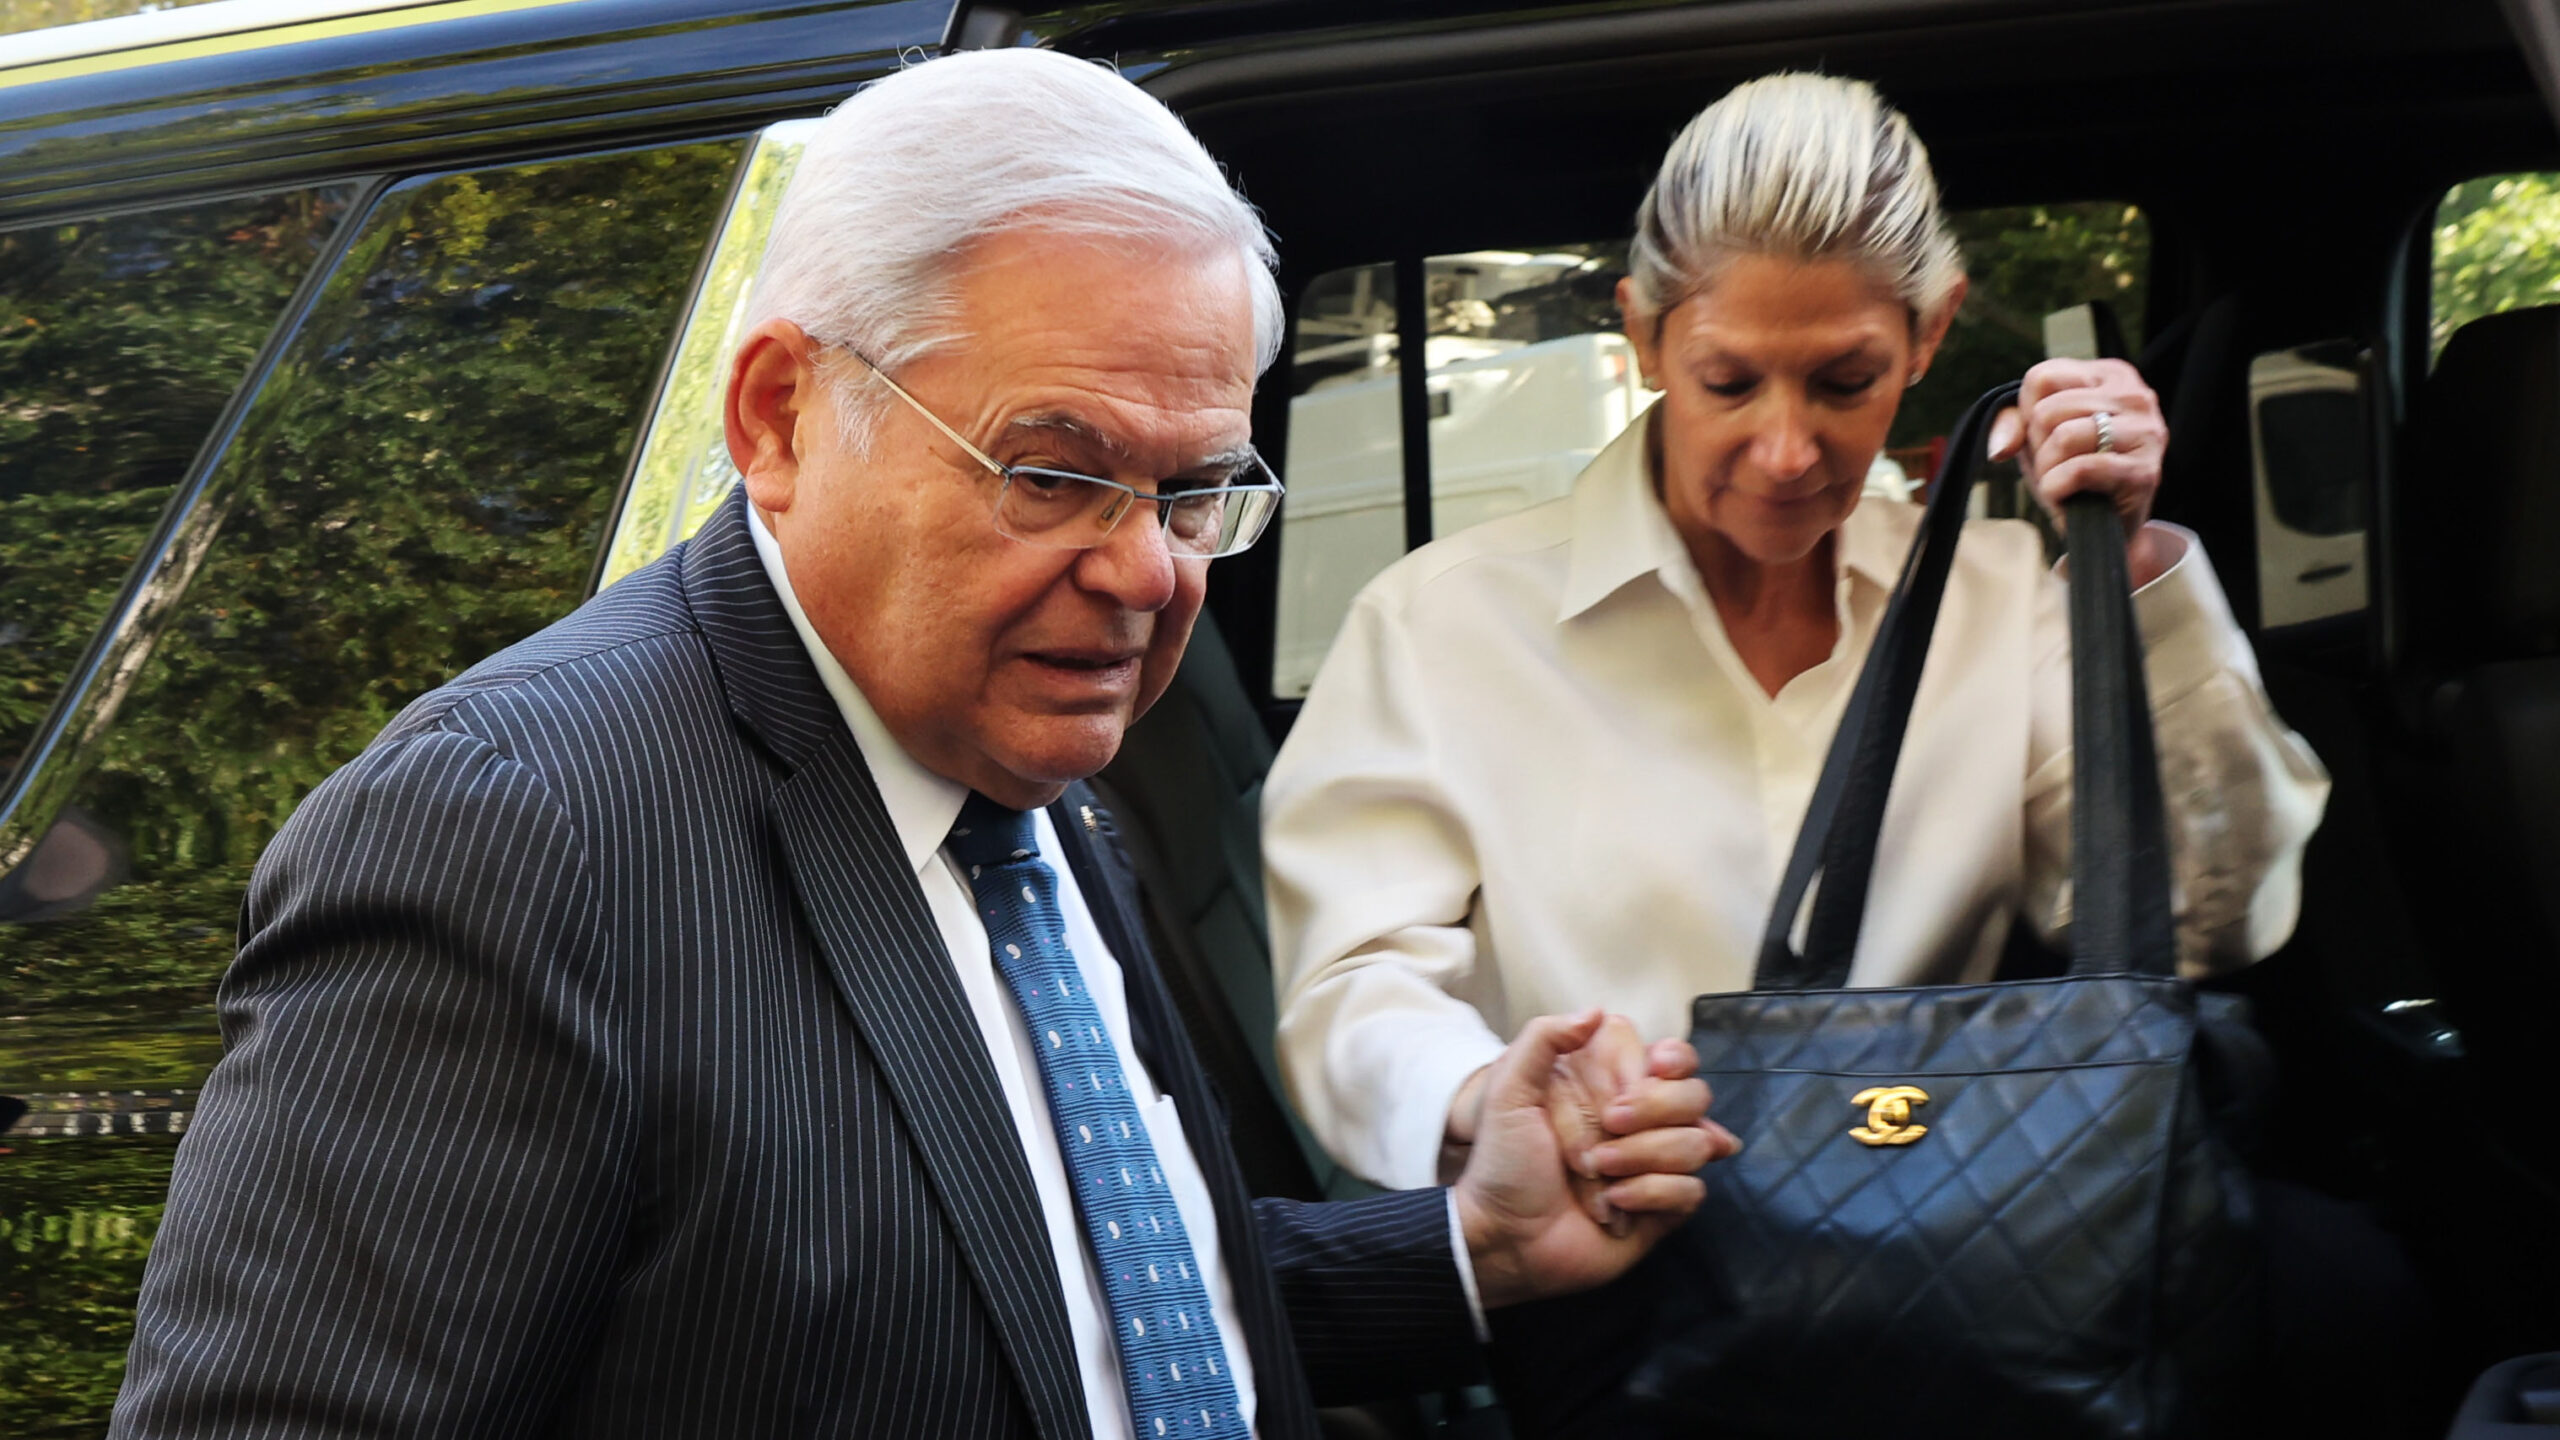 Bob Menendez’s wife caused a fatal accident in 2018, prompting her to acquire a car that resulted in an indictment.